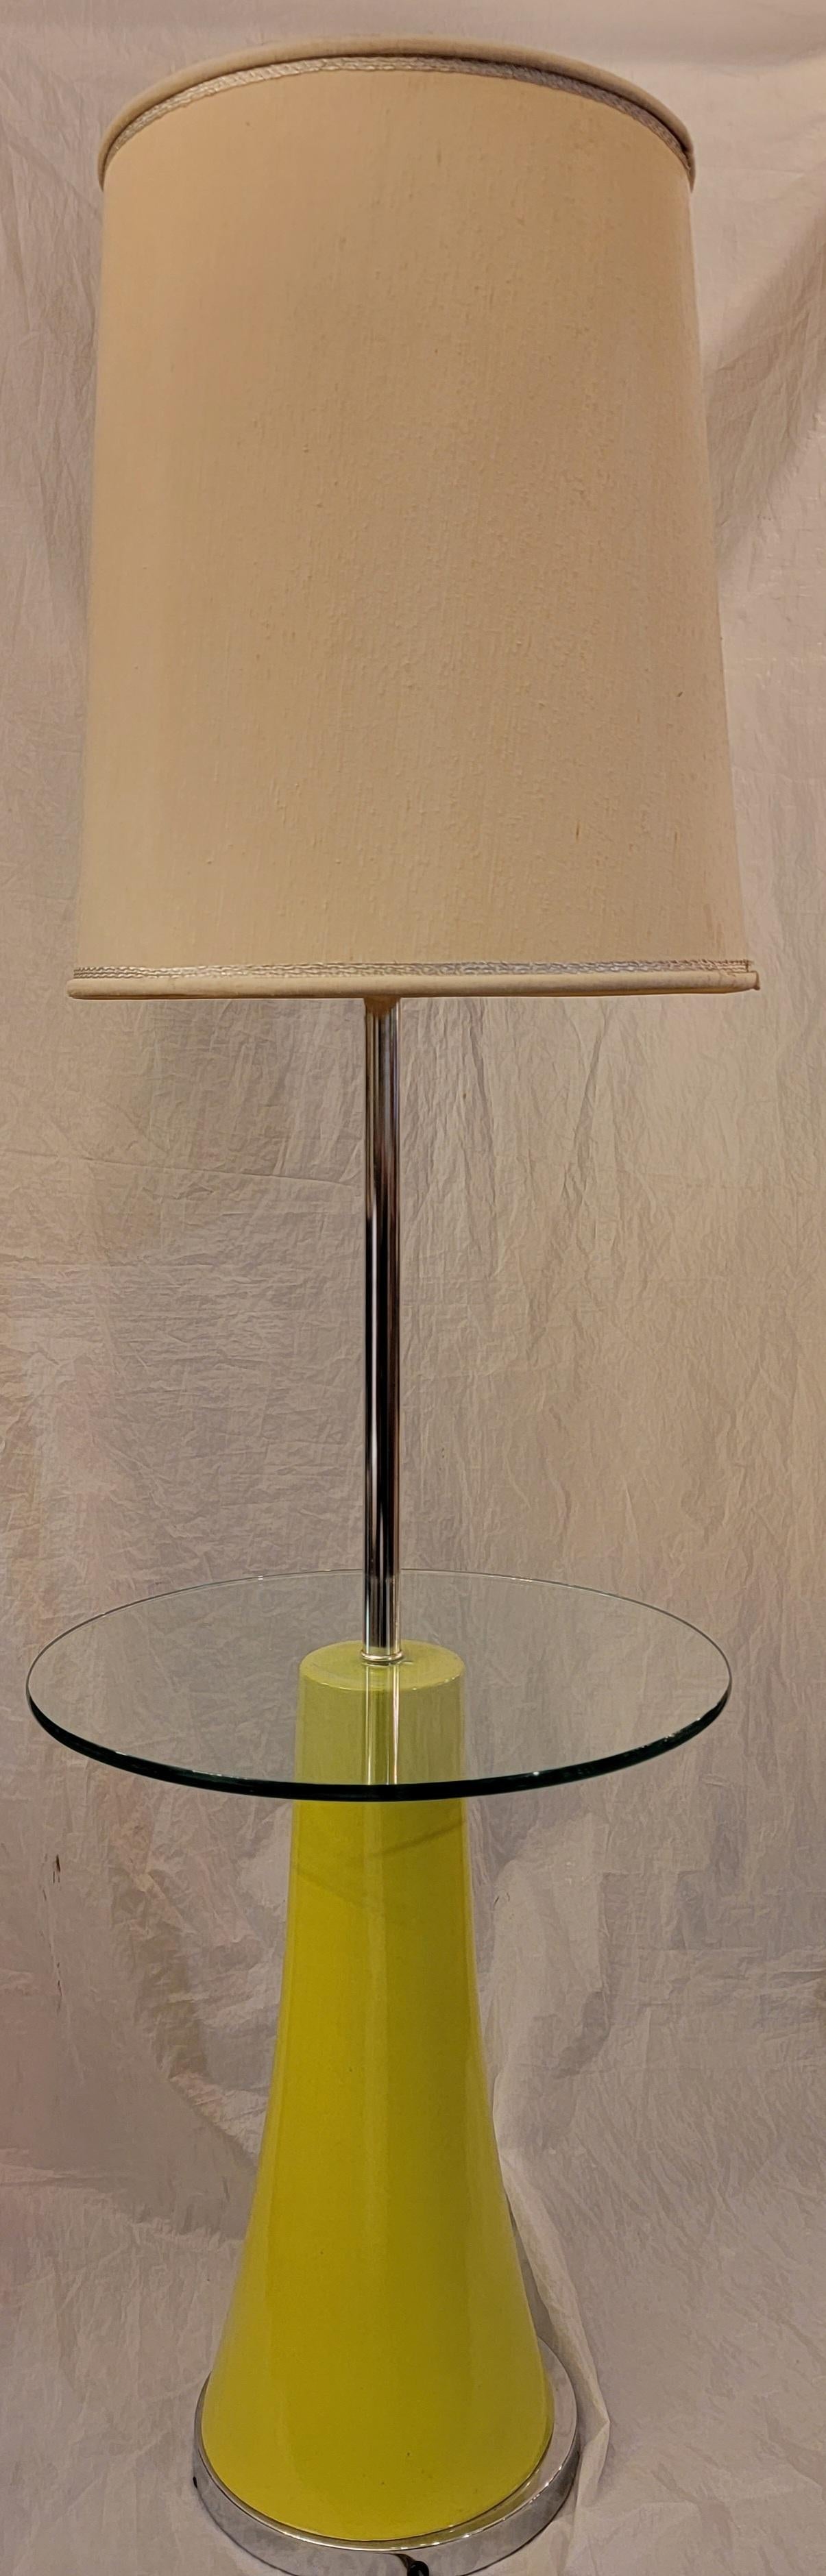 1980s Midcentury Chrome and Lacquered Floor Lamp with Round Glass Center Table In Good Condition For Sale In Pasadena, CA